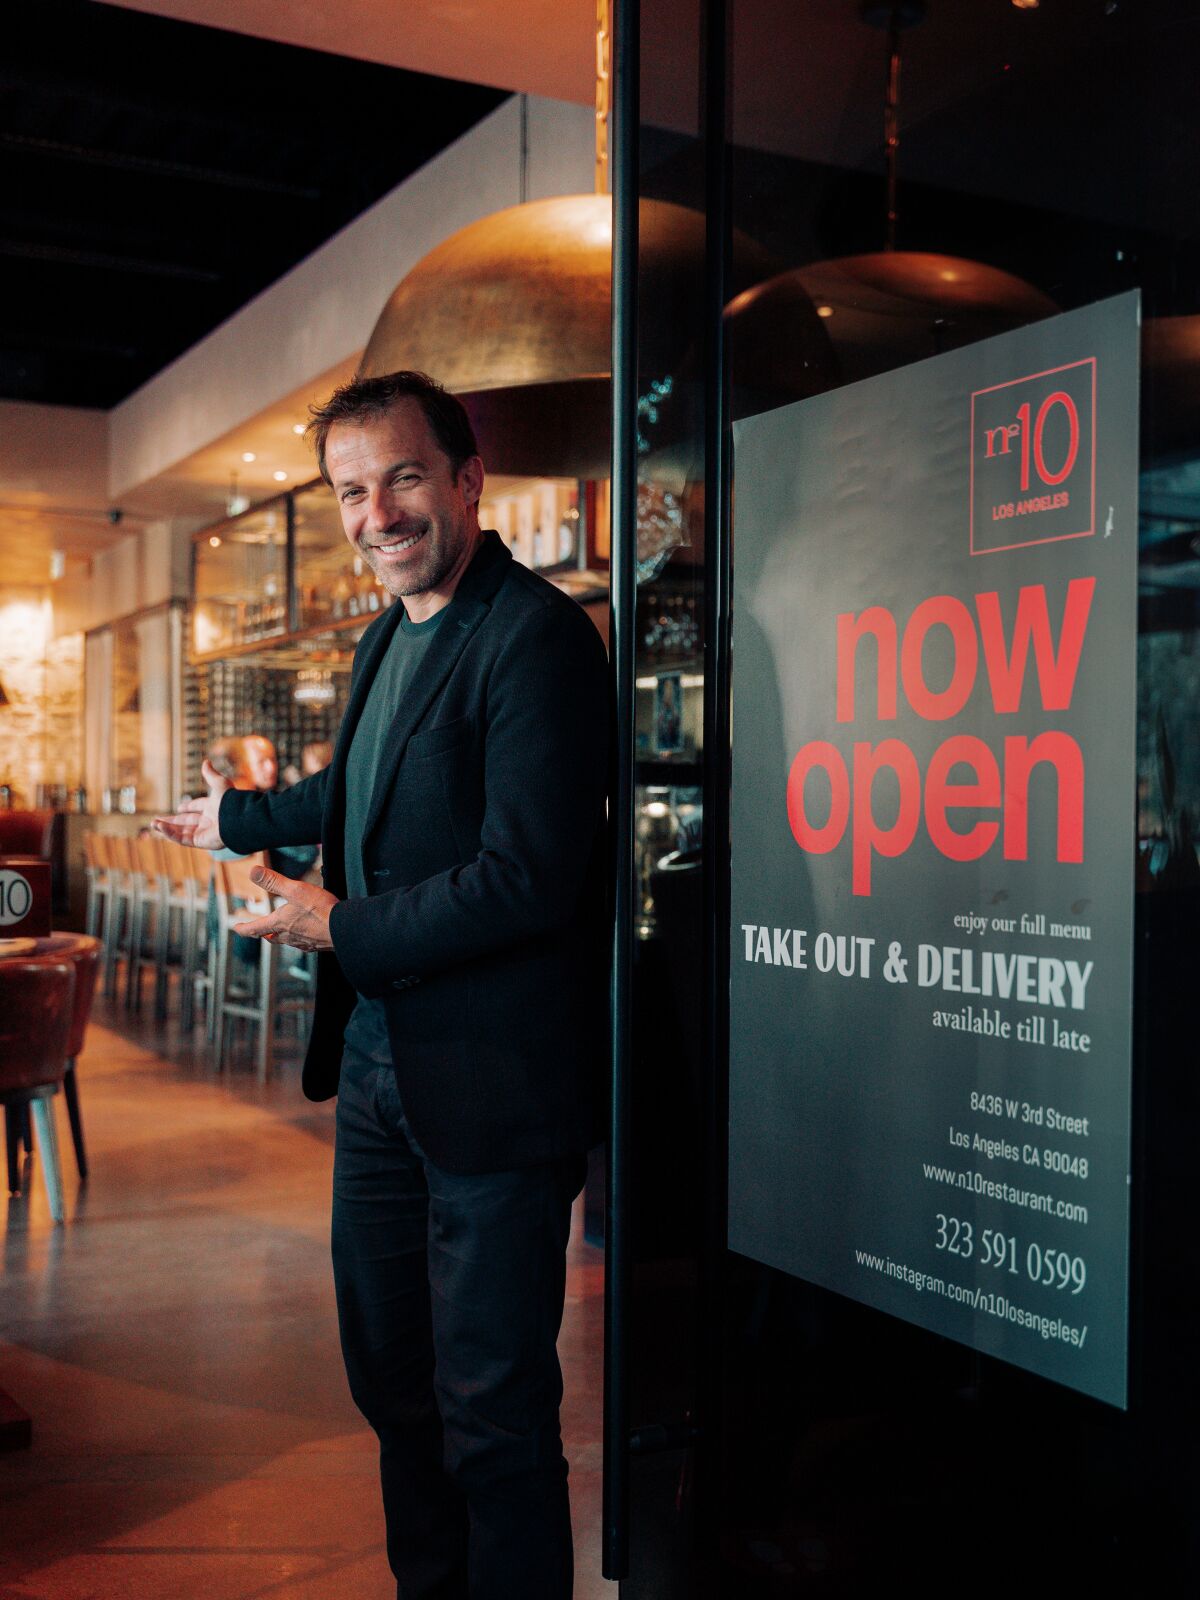 Former soccer star Alessandro Del Piero has focused on a variety of business ventures, including the restaurant n10.